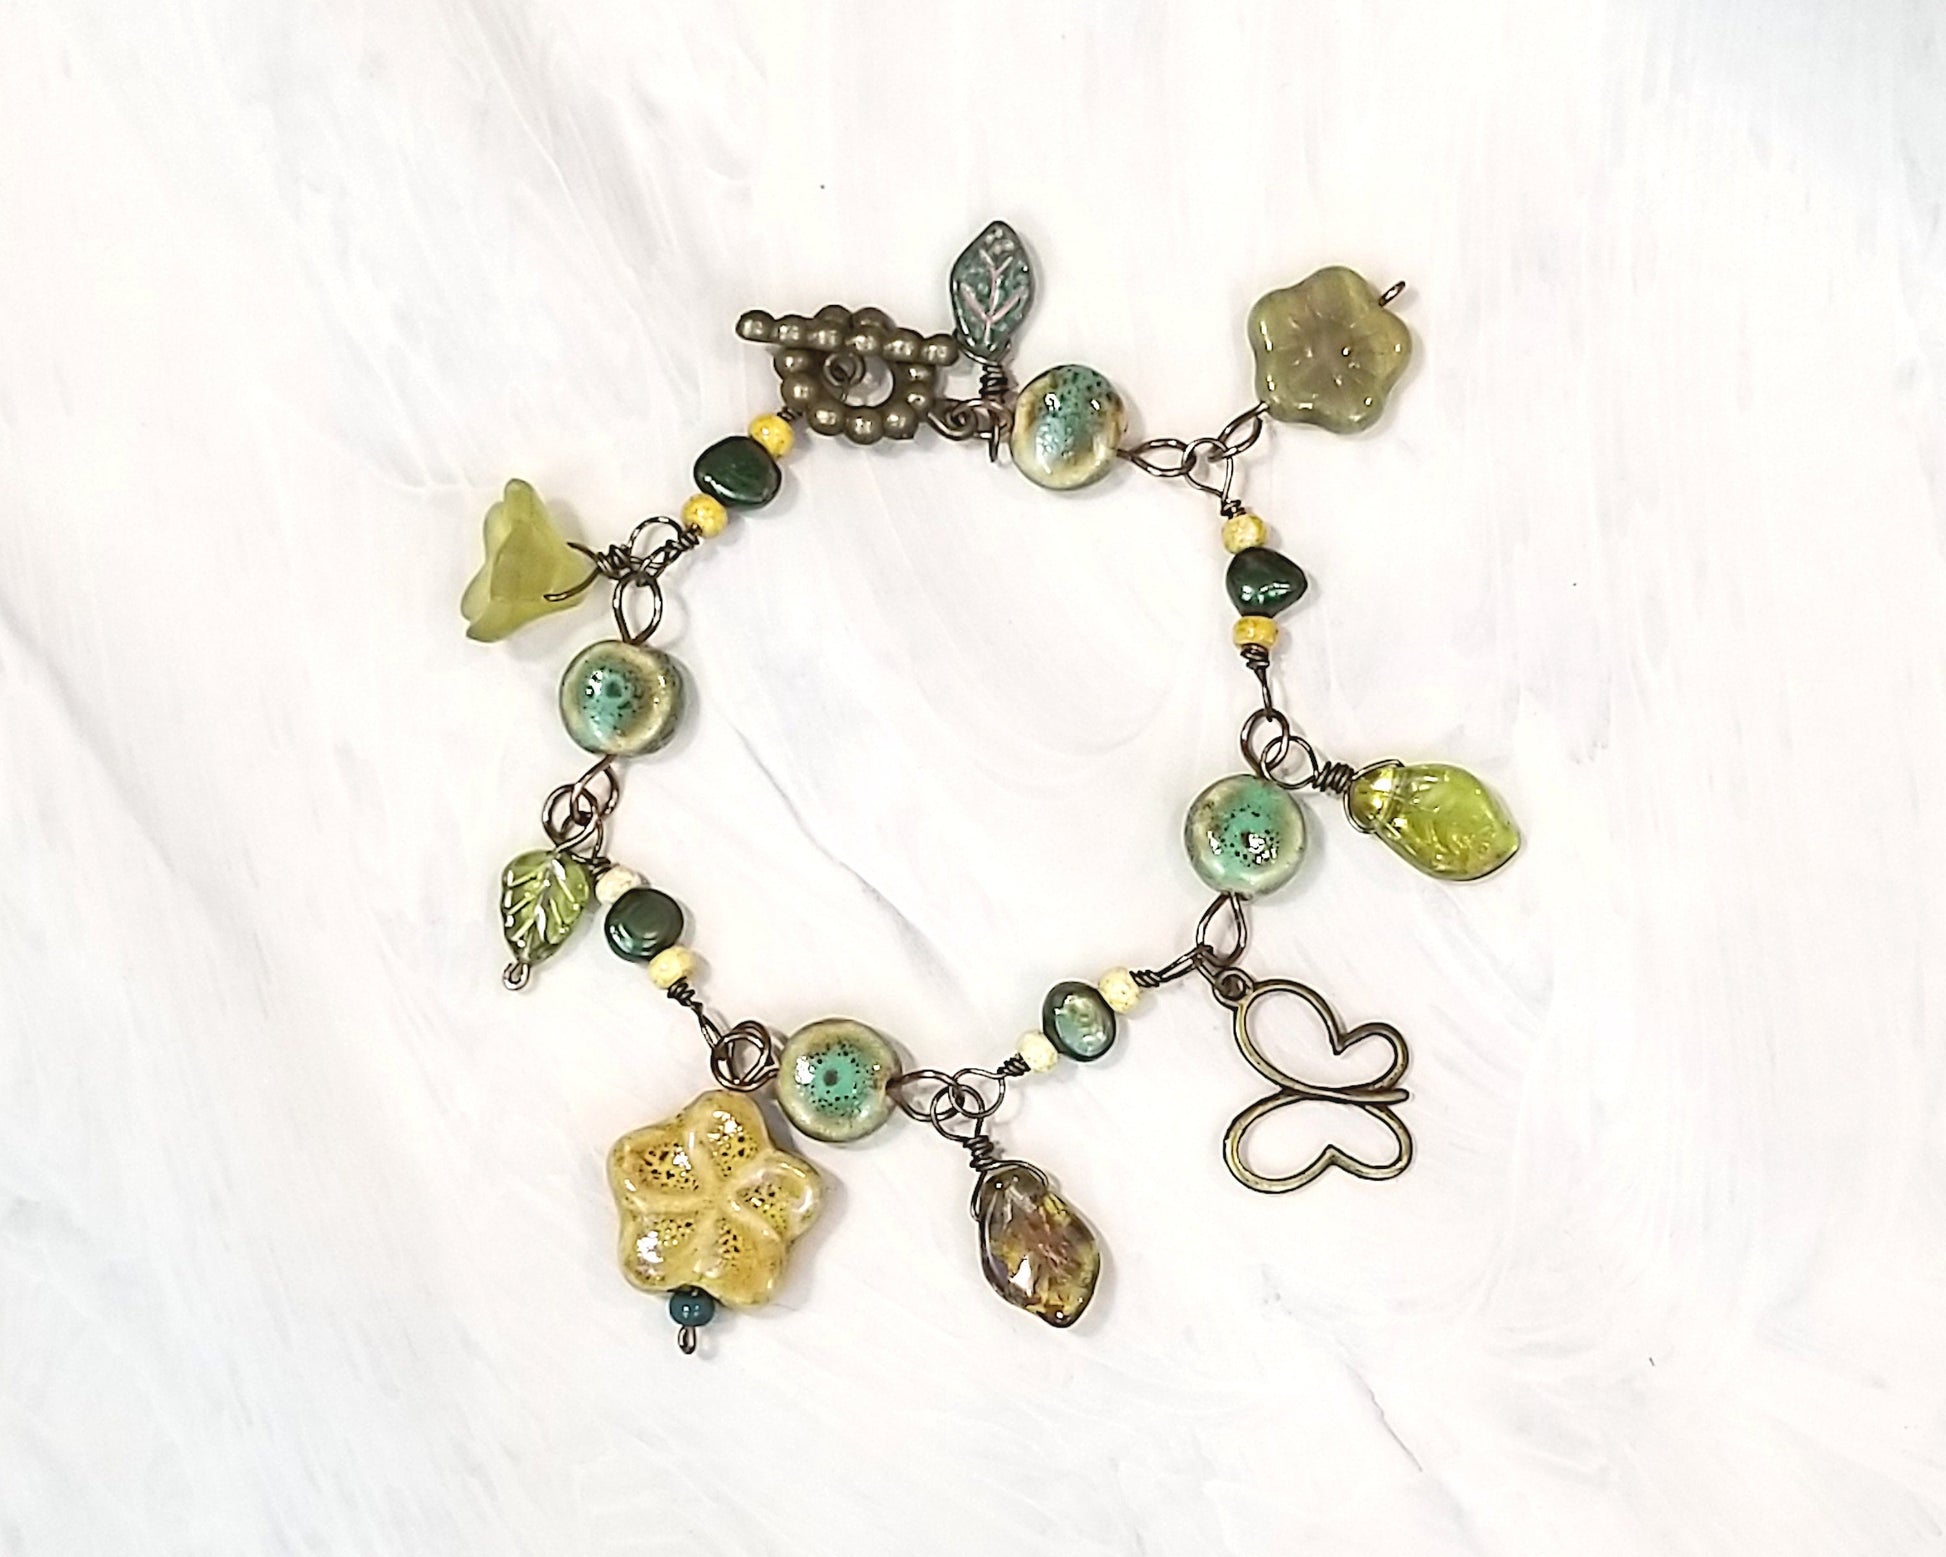 Forest Bracelet in Green and Amber with Ceramic and Glass Beads Adjustable Length